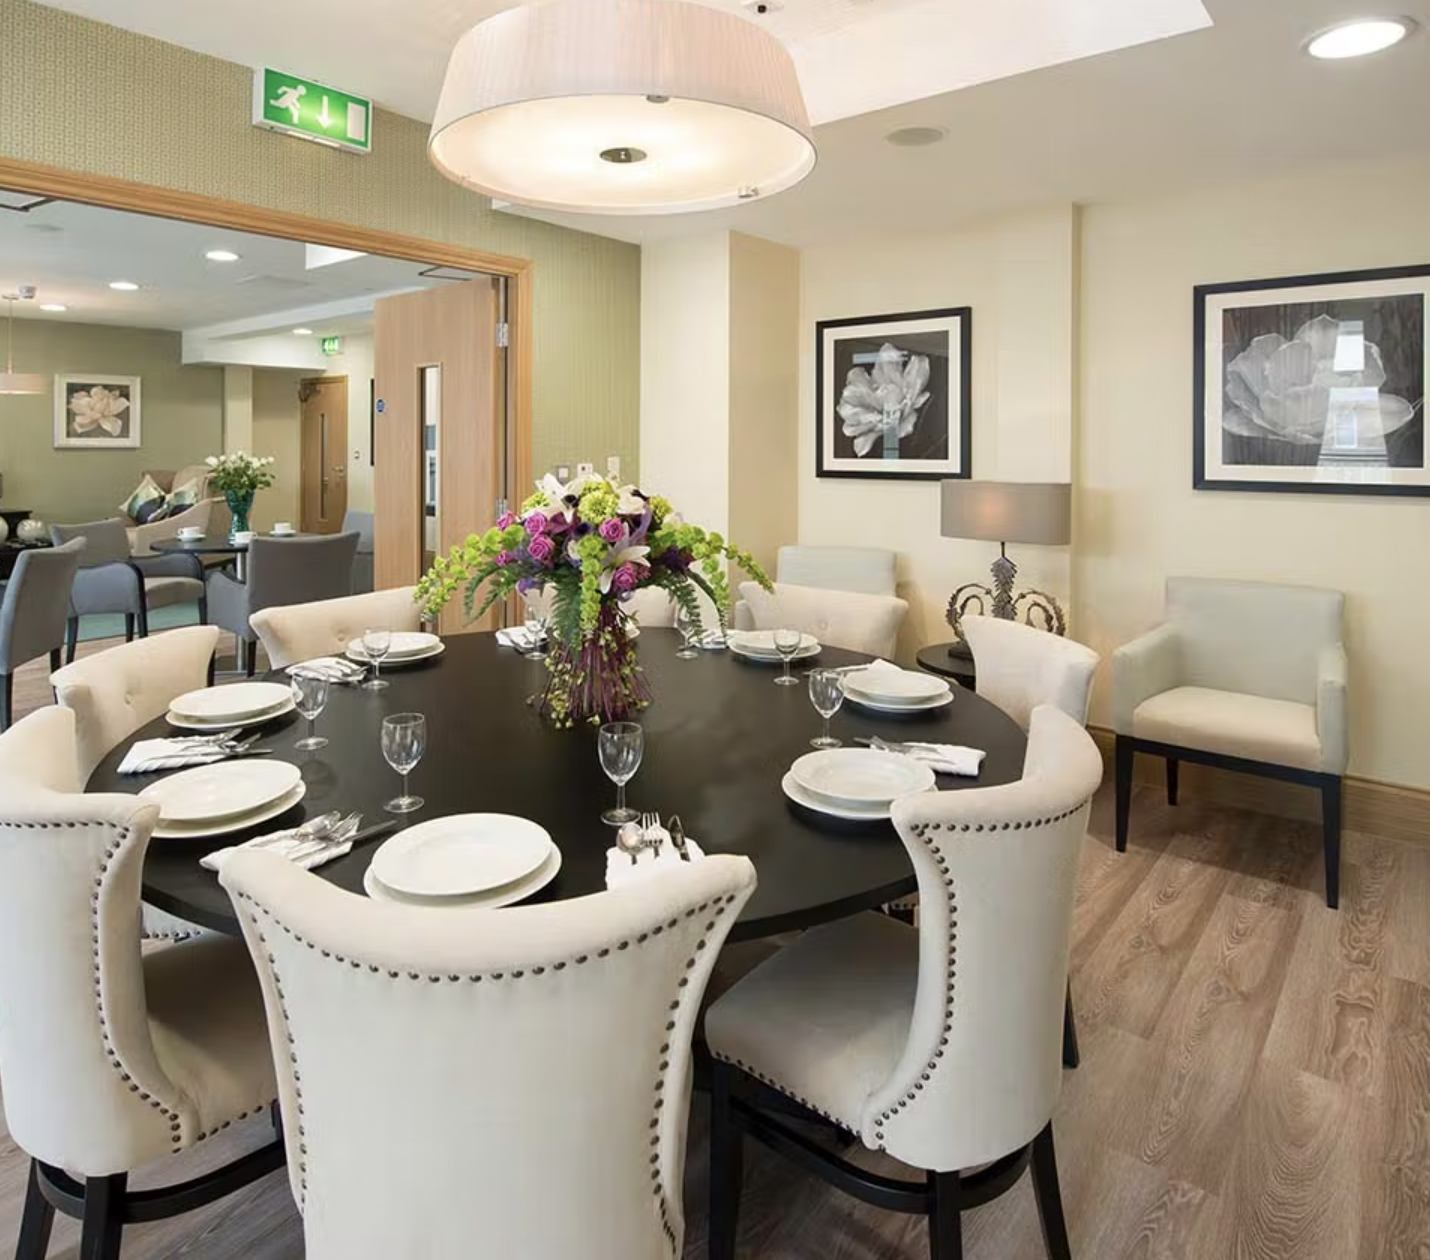 Independent Care Home - Templeton House care home 8